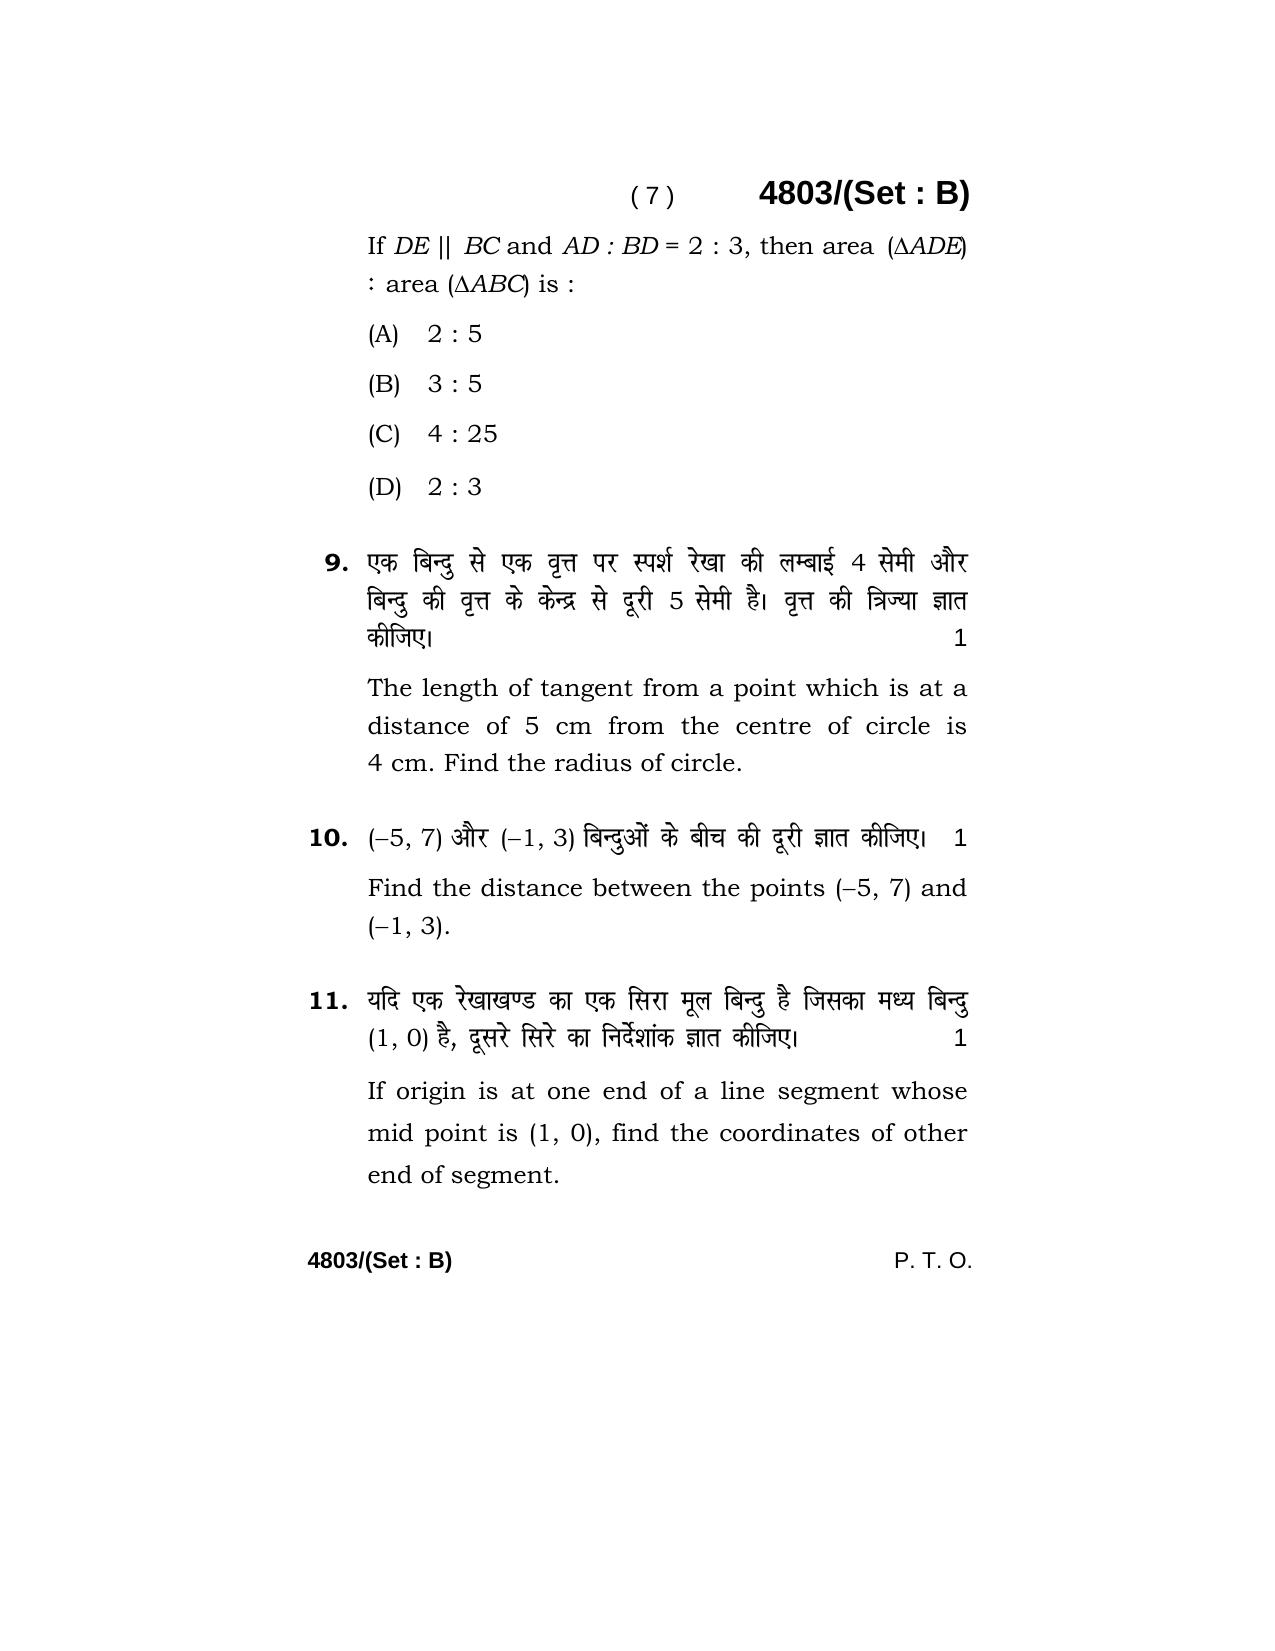 Haryana Board HBSE Class 10 Mathematics 2020 Question Paper - Page 23